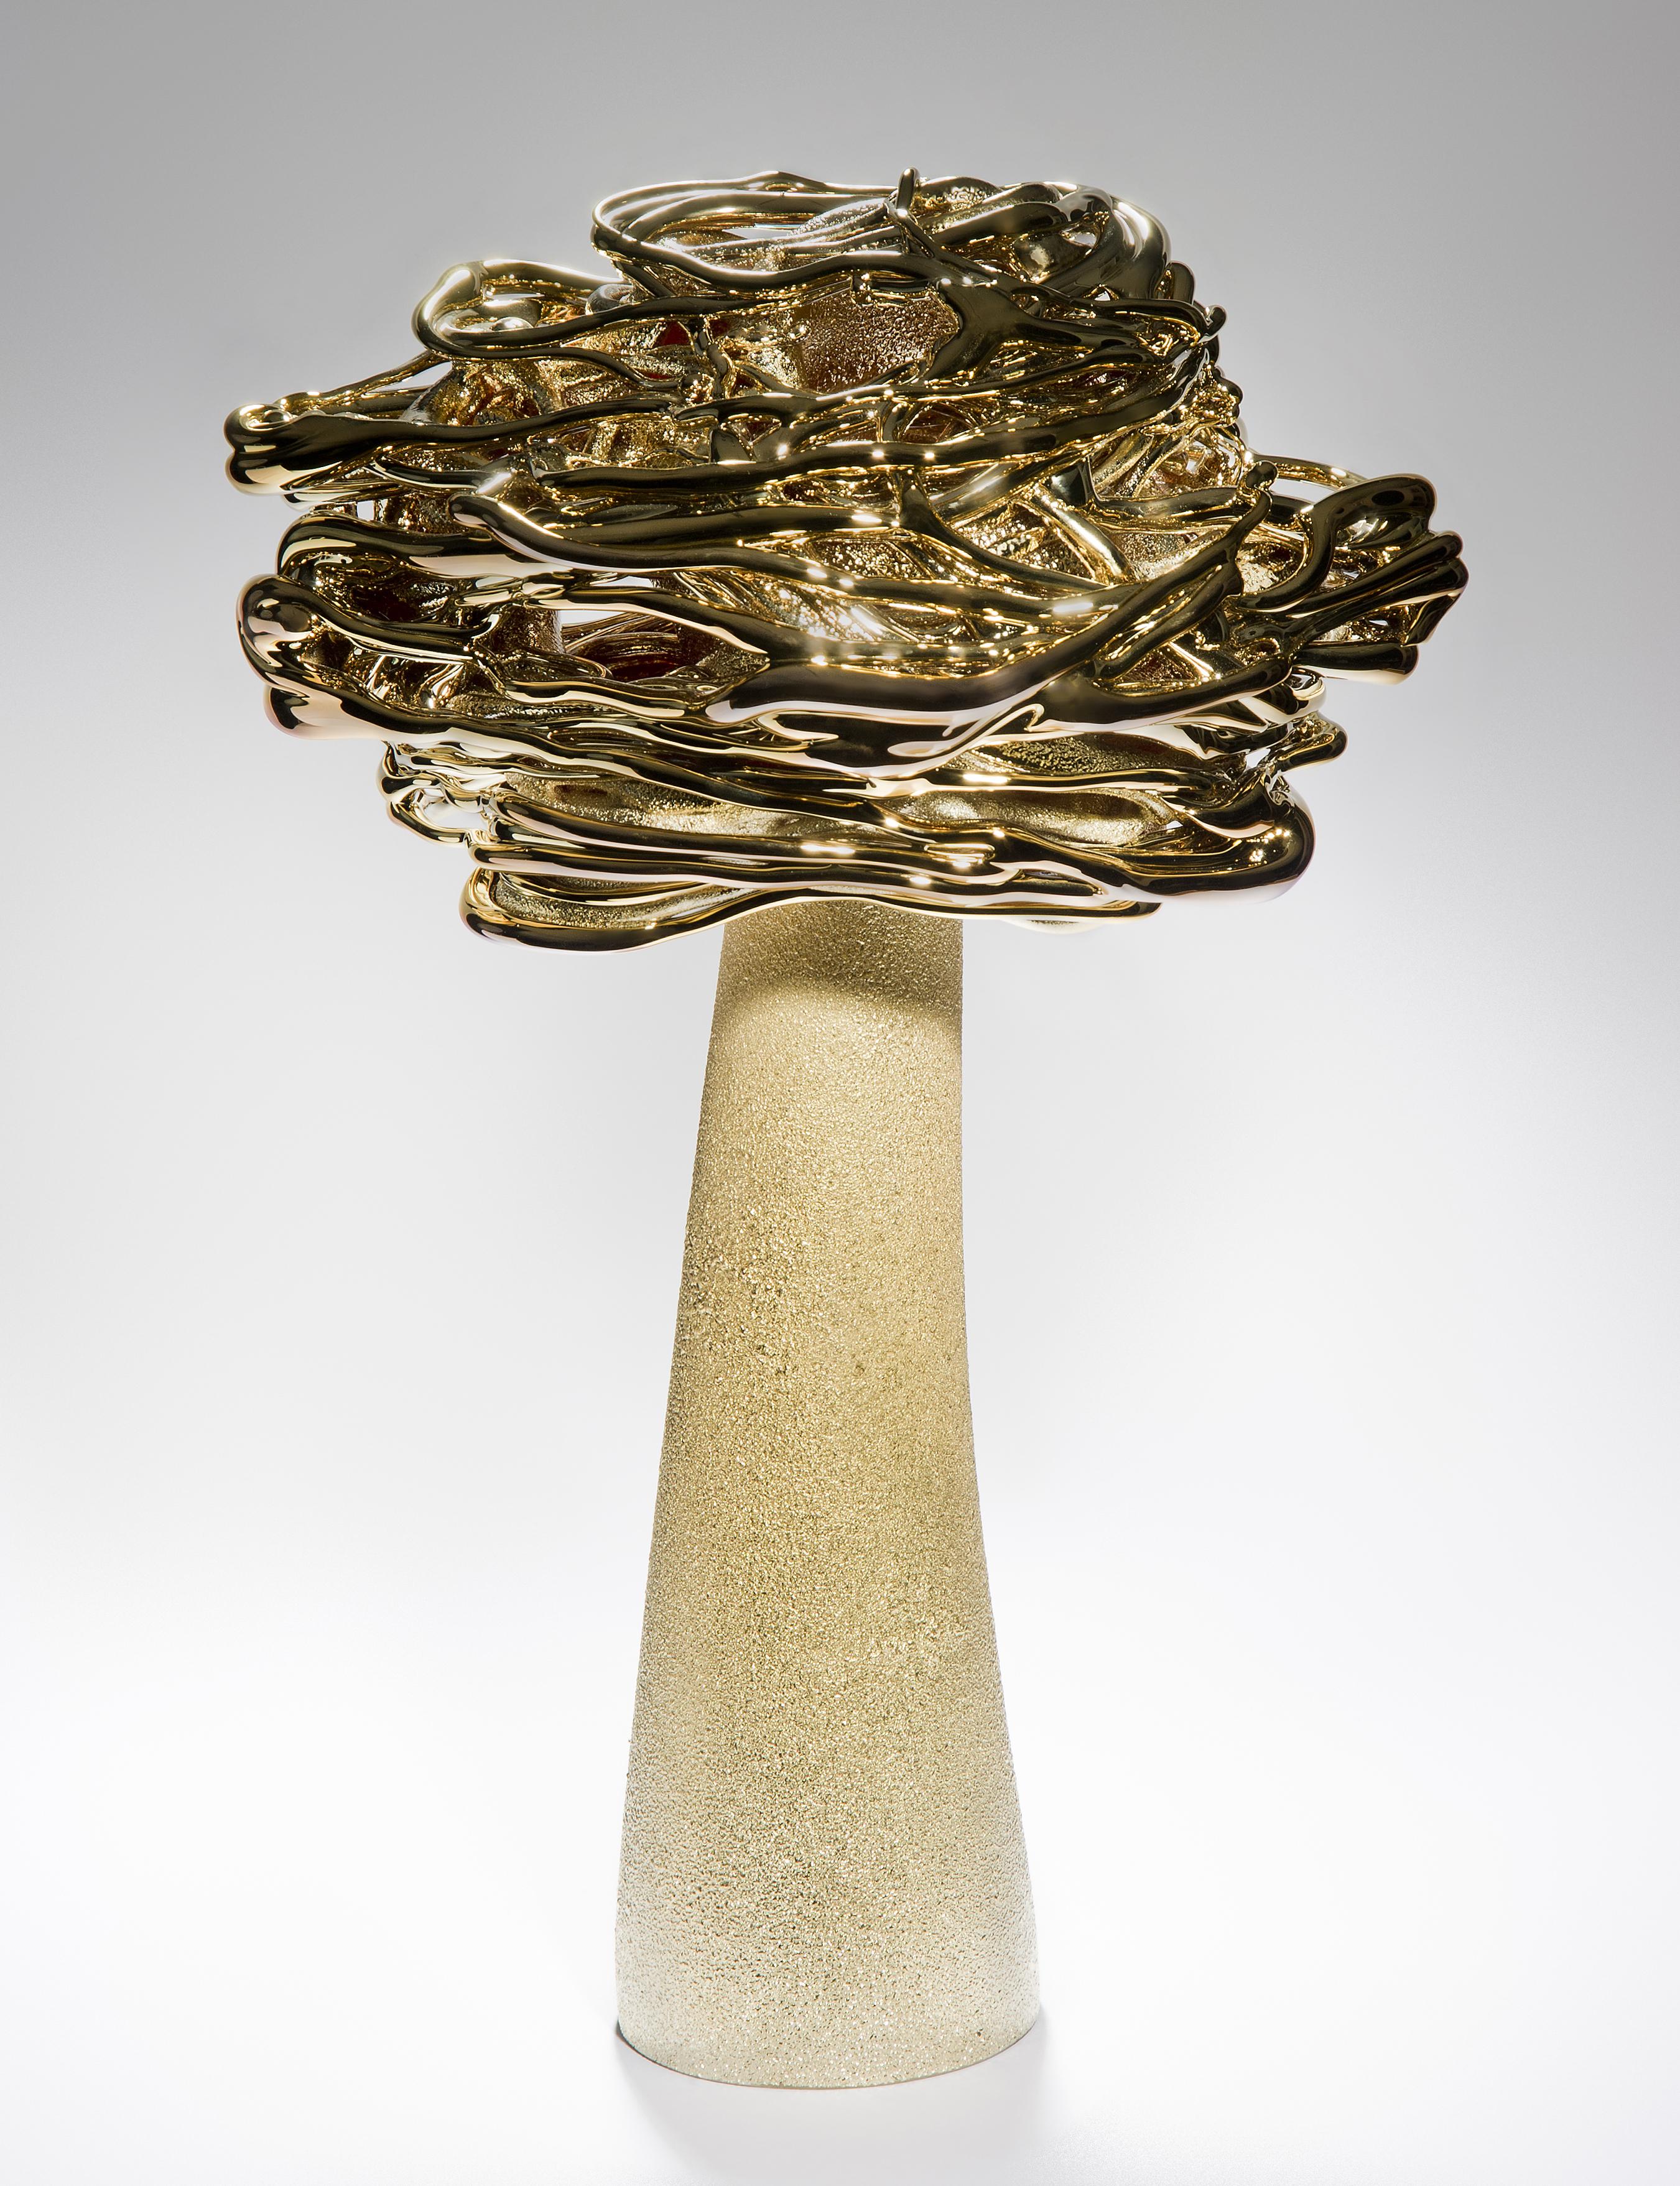 Desert Flower, is a unique brass and glass sculpture by the Lithuanian artist Remigijus Kriukas. Blown and hot sculpted to create this substantial artwork, the final piece is finished with a fine coating of brass.

In 1985 Remigijus Kriukas